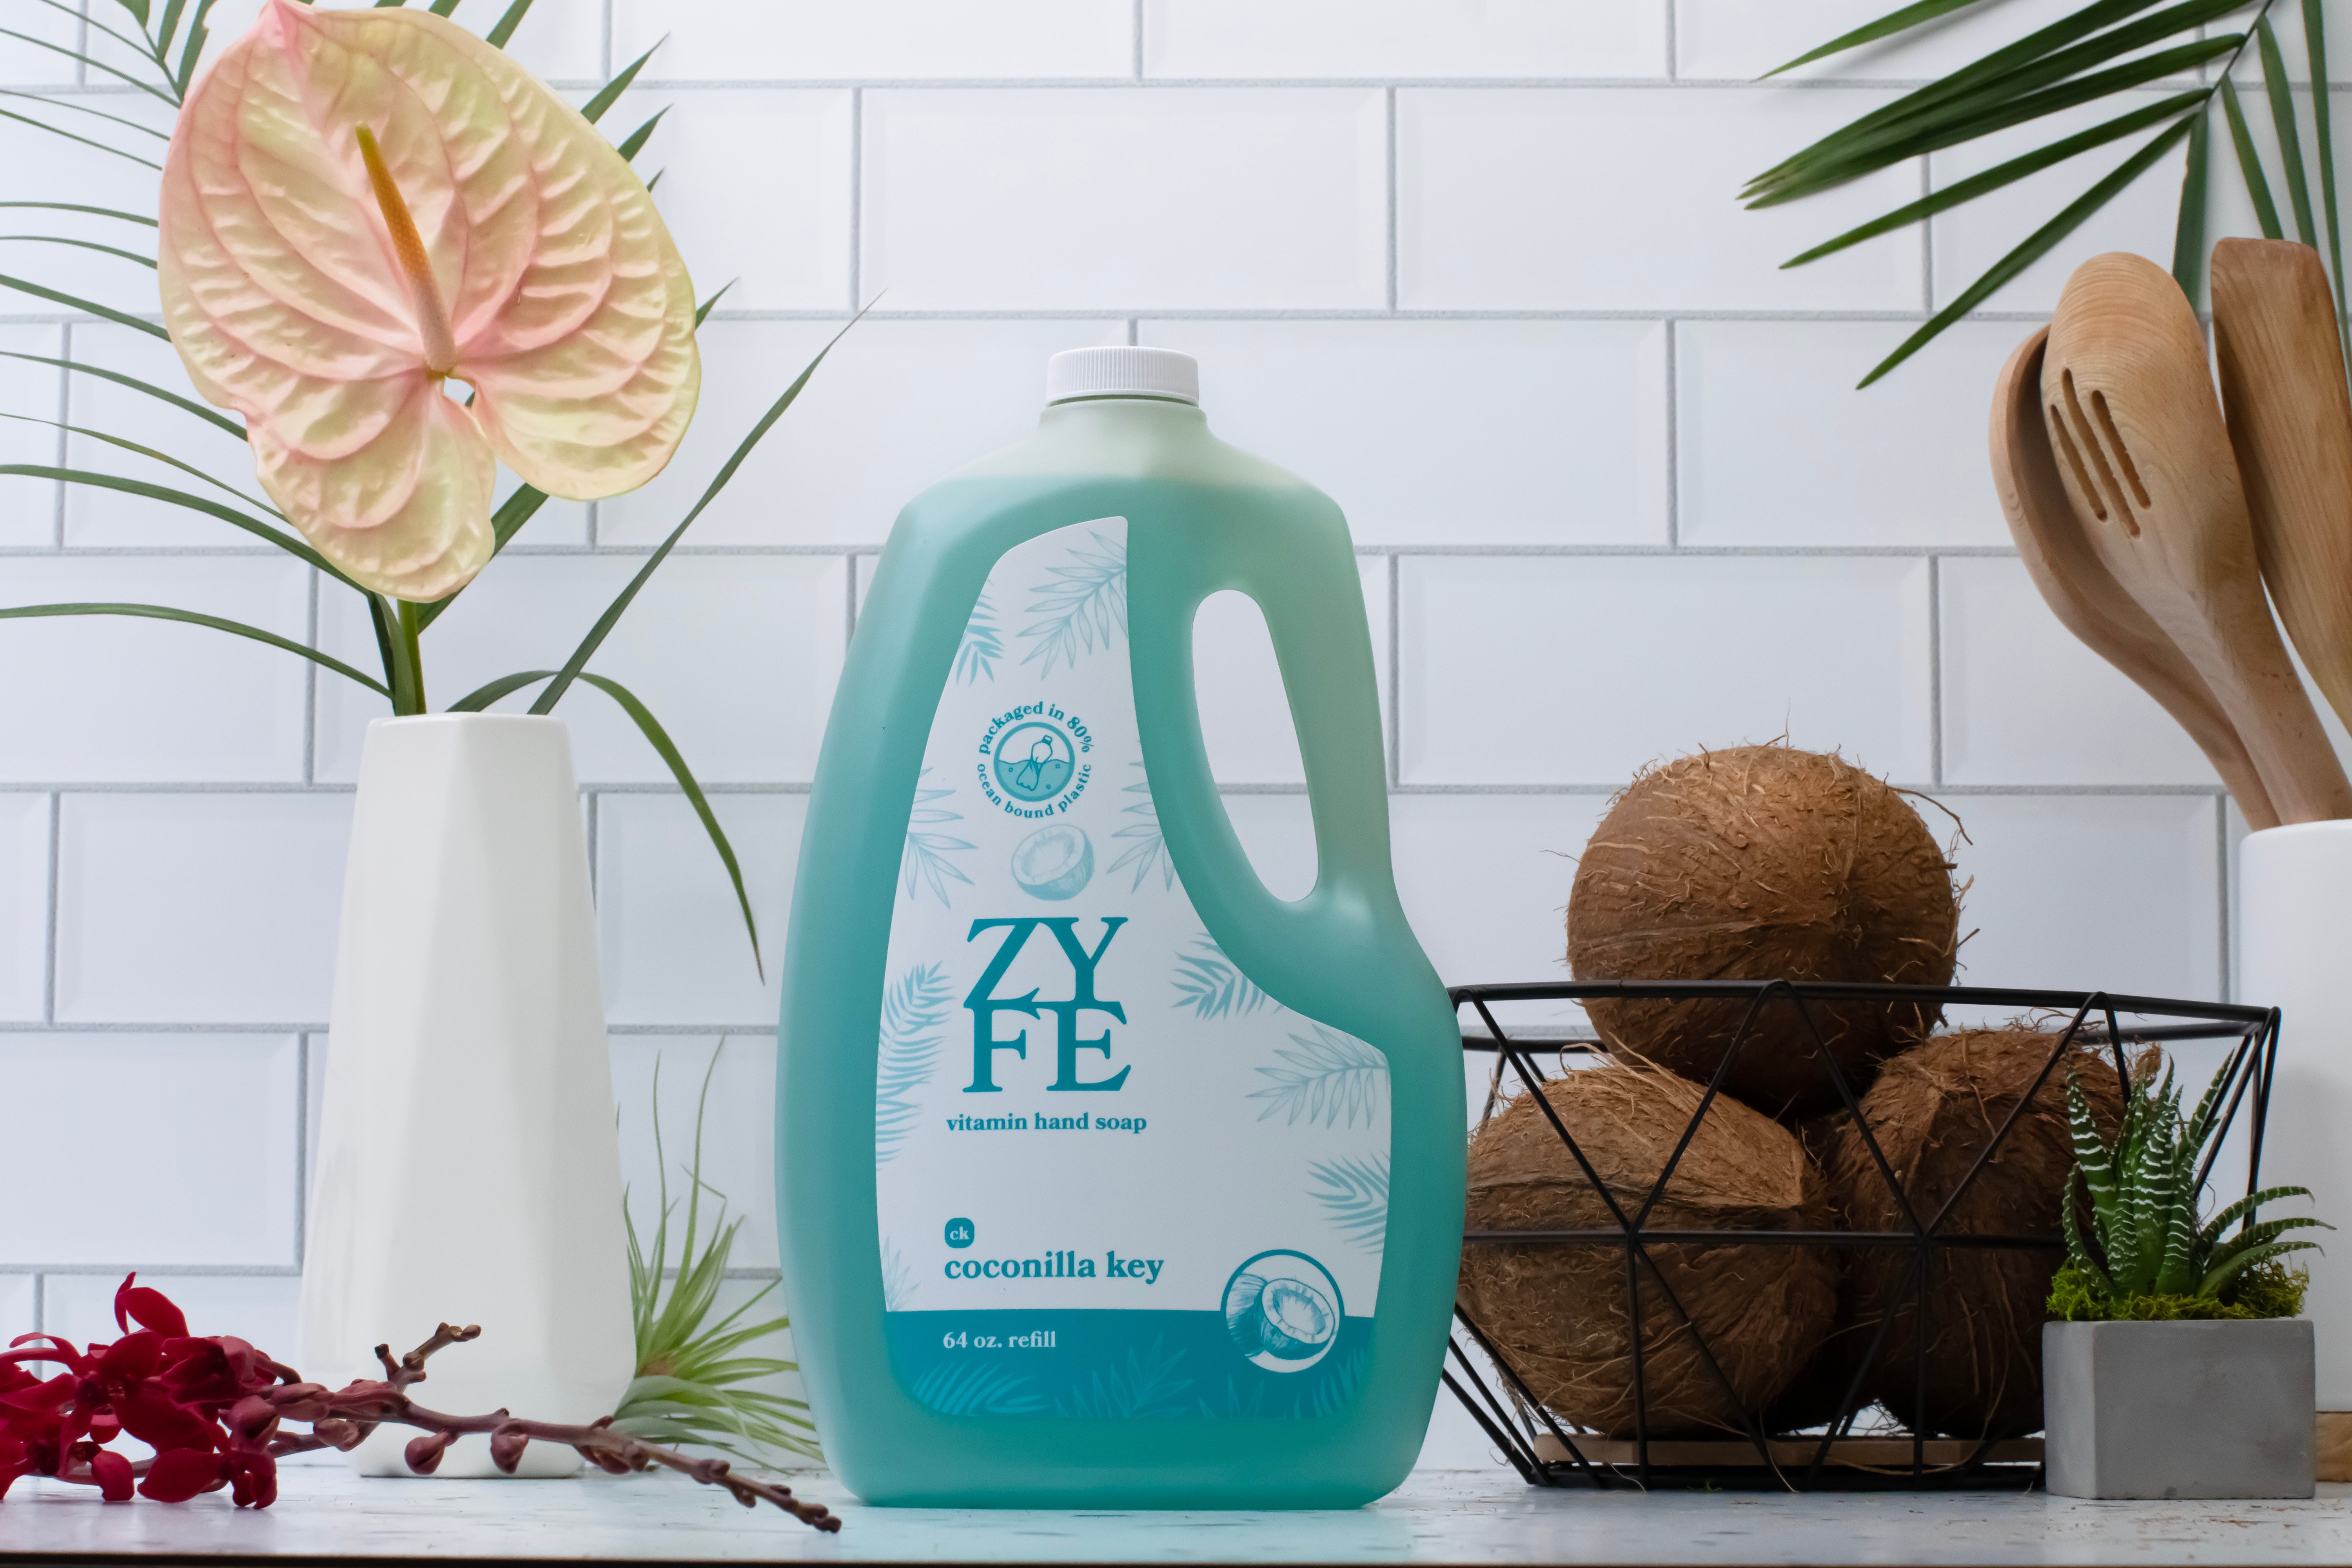 64oz bottle of coconilla key on kitchen counter next to a basket of coconuts and tropical plants.